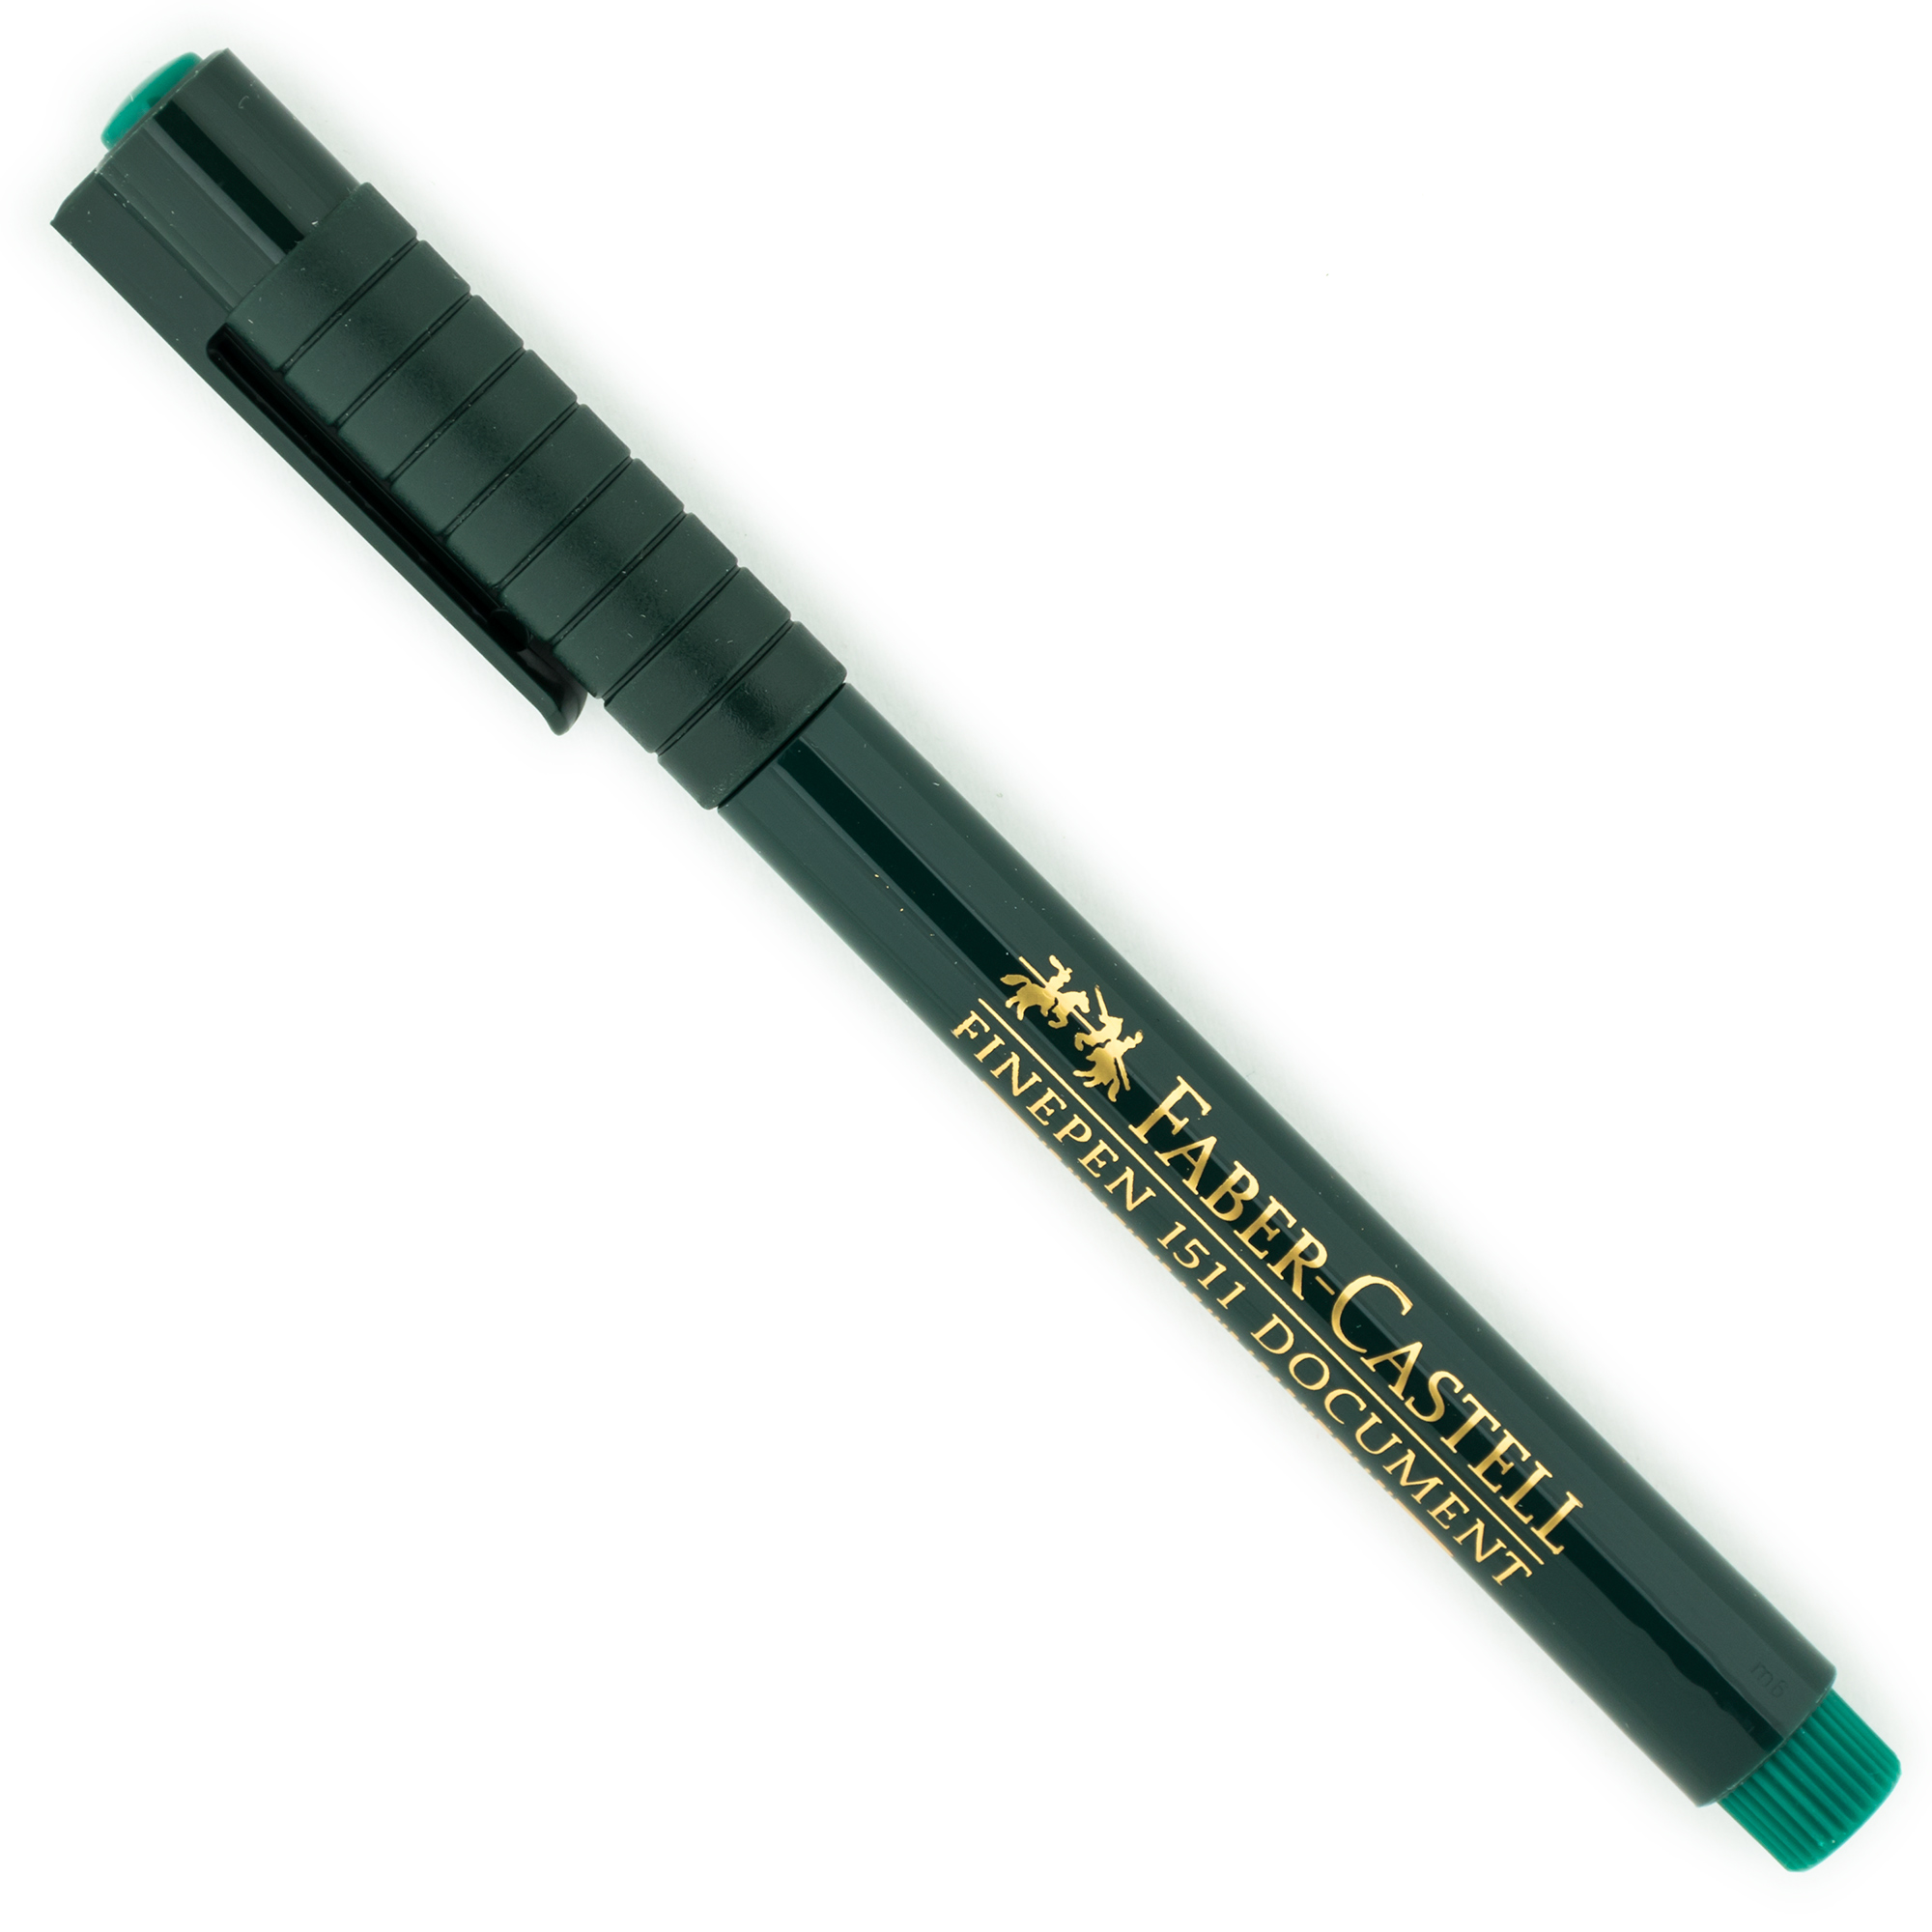  Faber Castell  Finepen 1511 Green a box of 10 scribe market